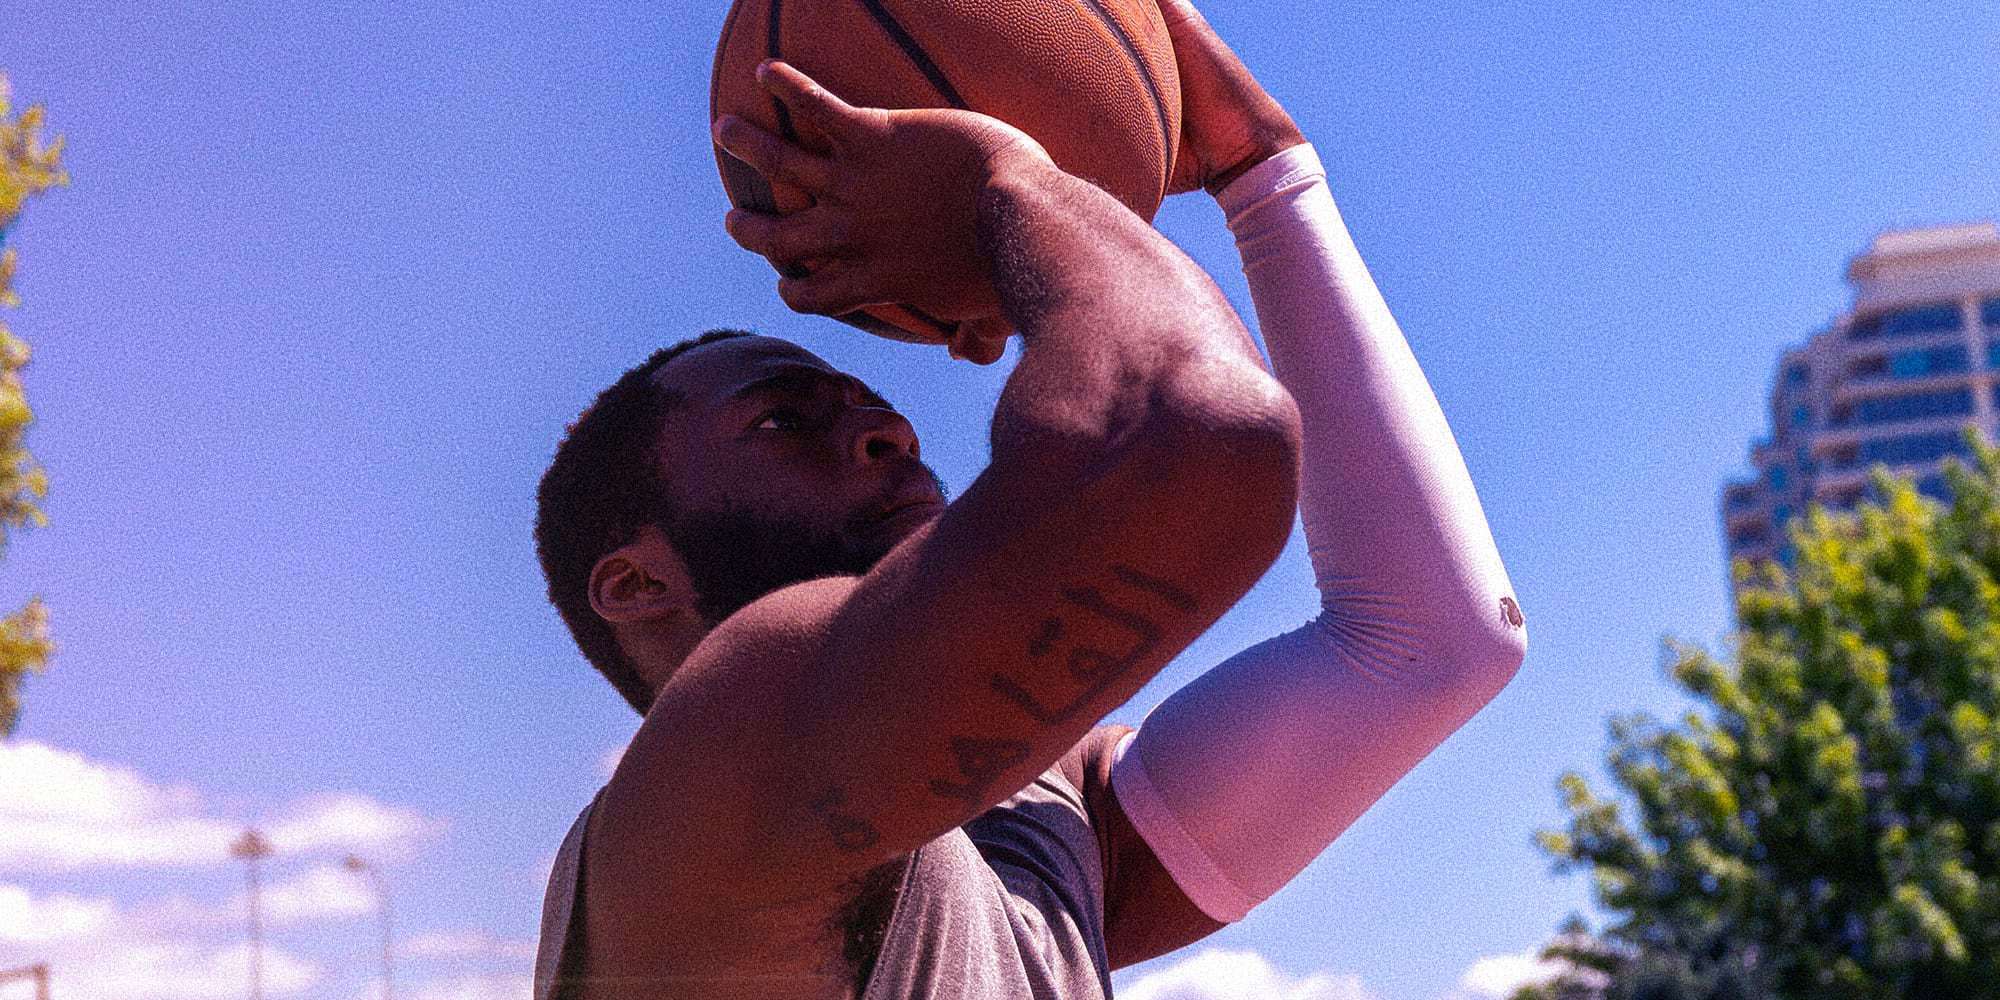 basketball player wearing sleeve on non shooting arm